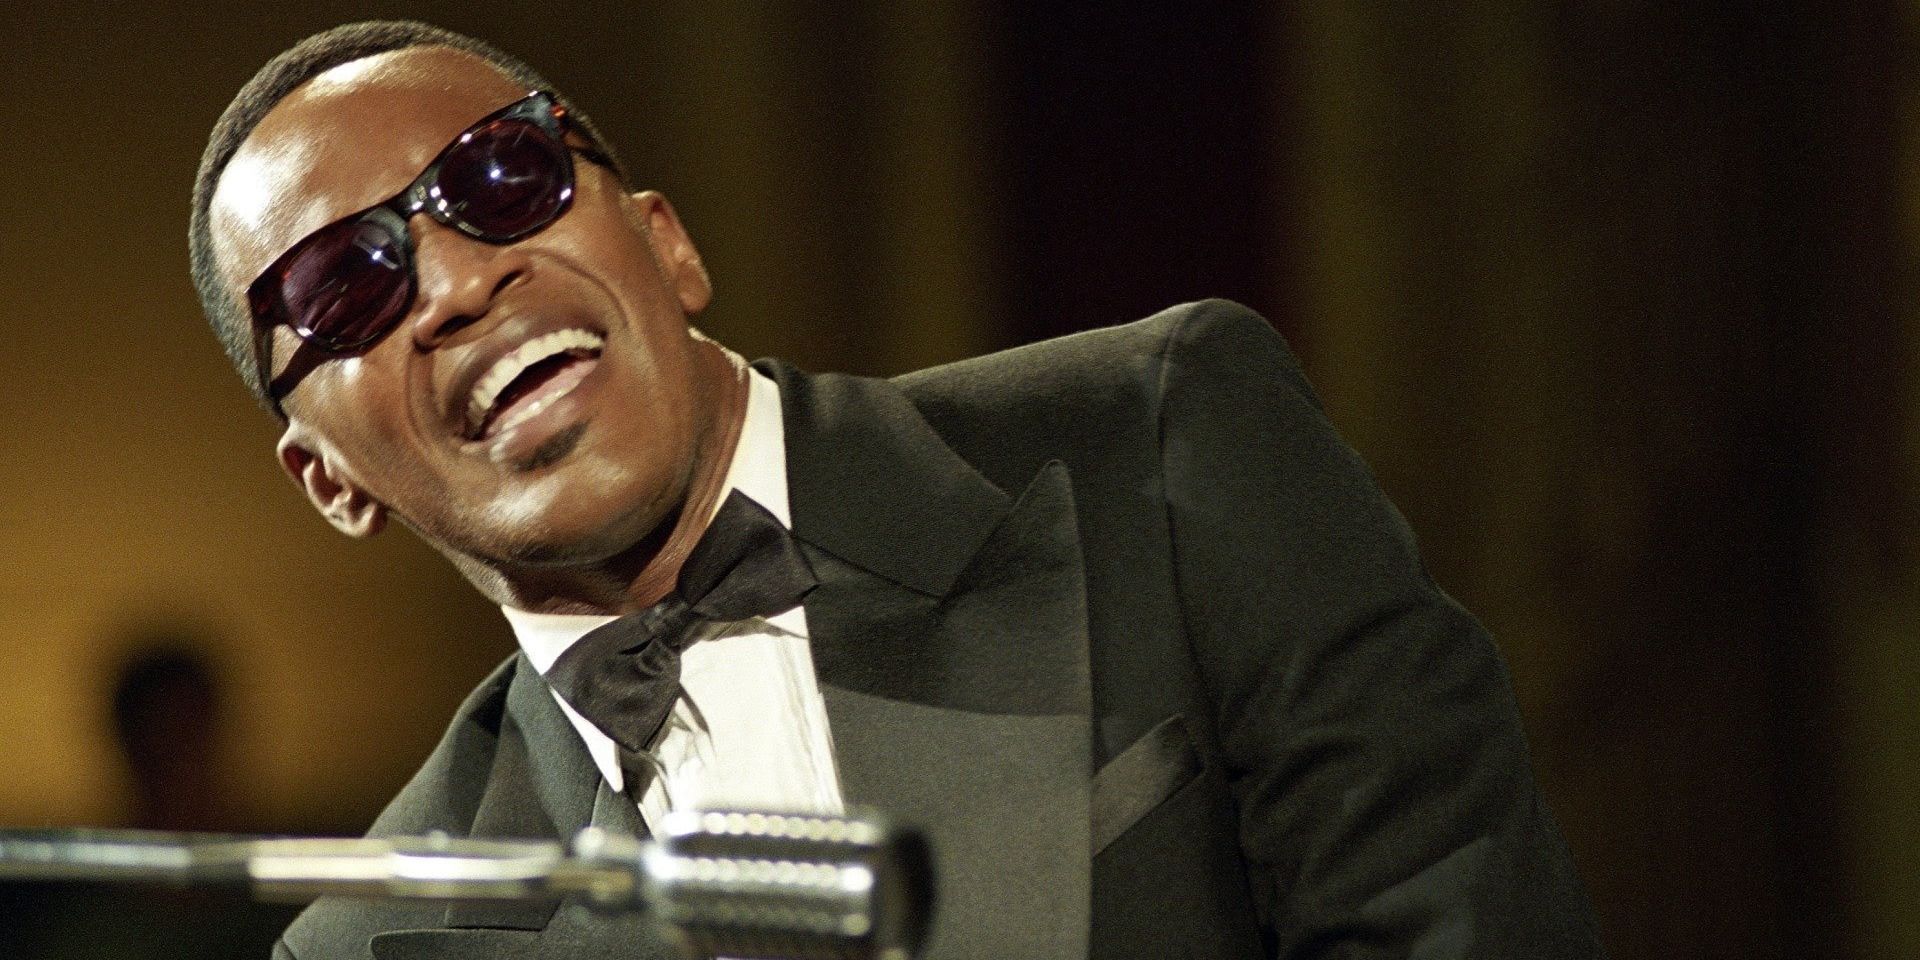 Jamie Foxx as Ray Charles in 'Ray'